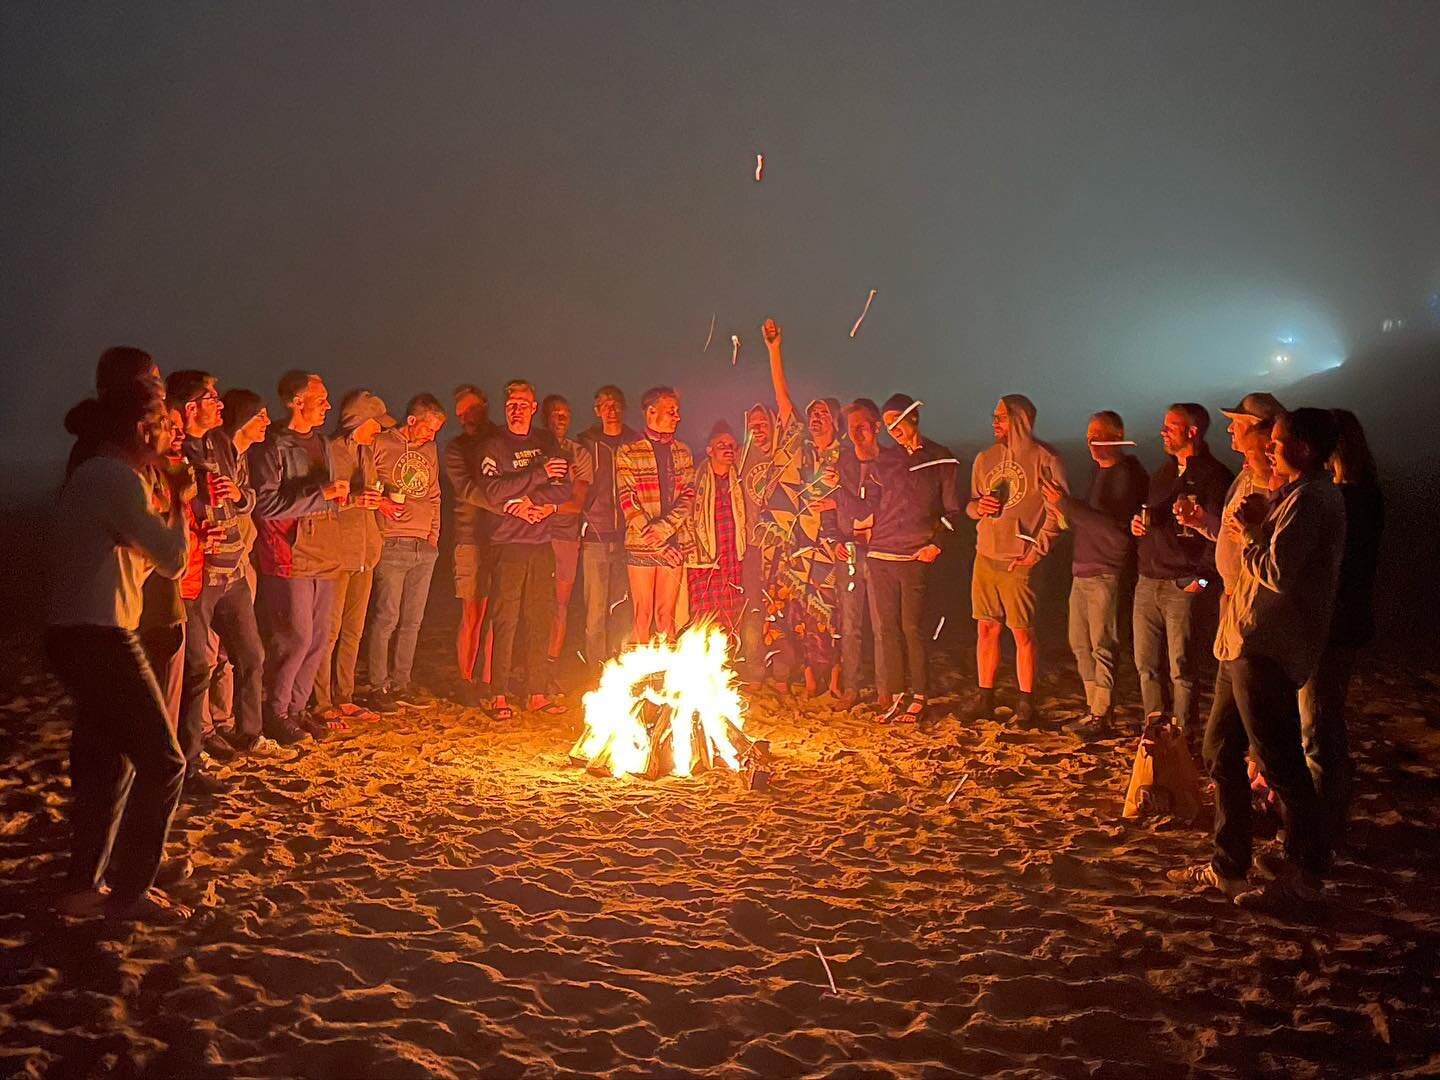 Some 30 members went to the coast for our annual Fall Lodge Weekend! Some highlights included: walks and runs along the beach, late night bonfires, chill hot tub times, and fun games. Thanks to everyone who joined!

#pdxfrontrunners #frontrunners #lg